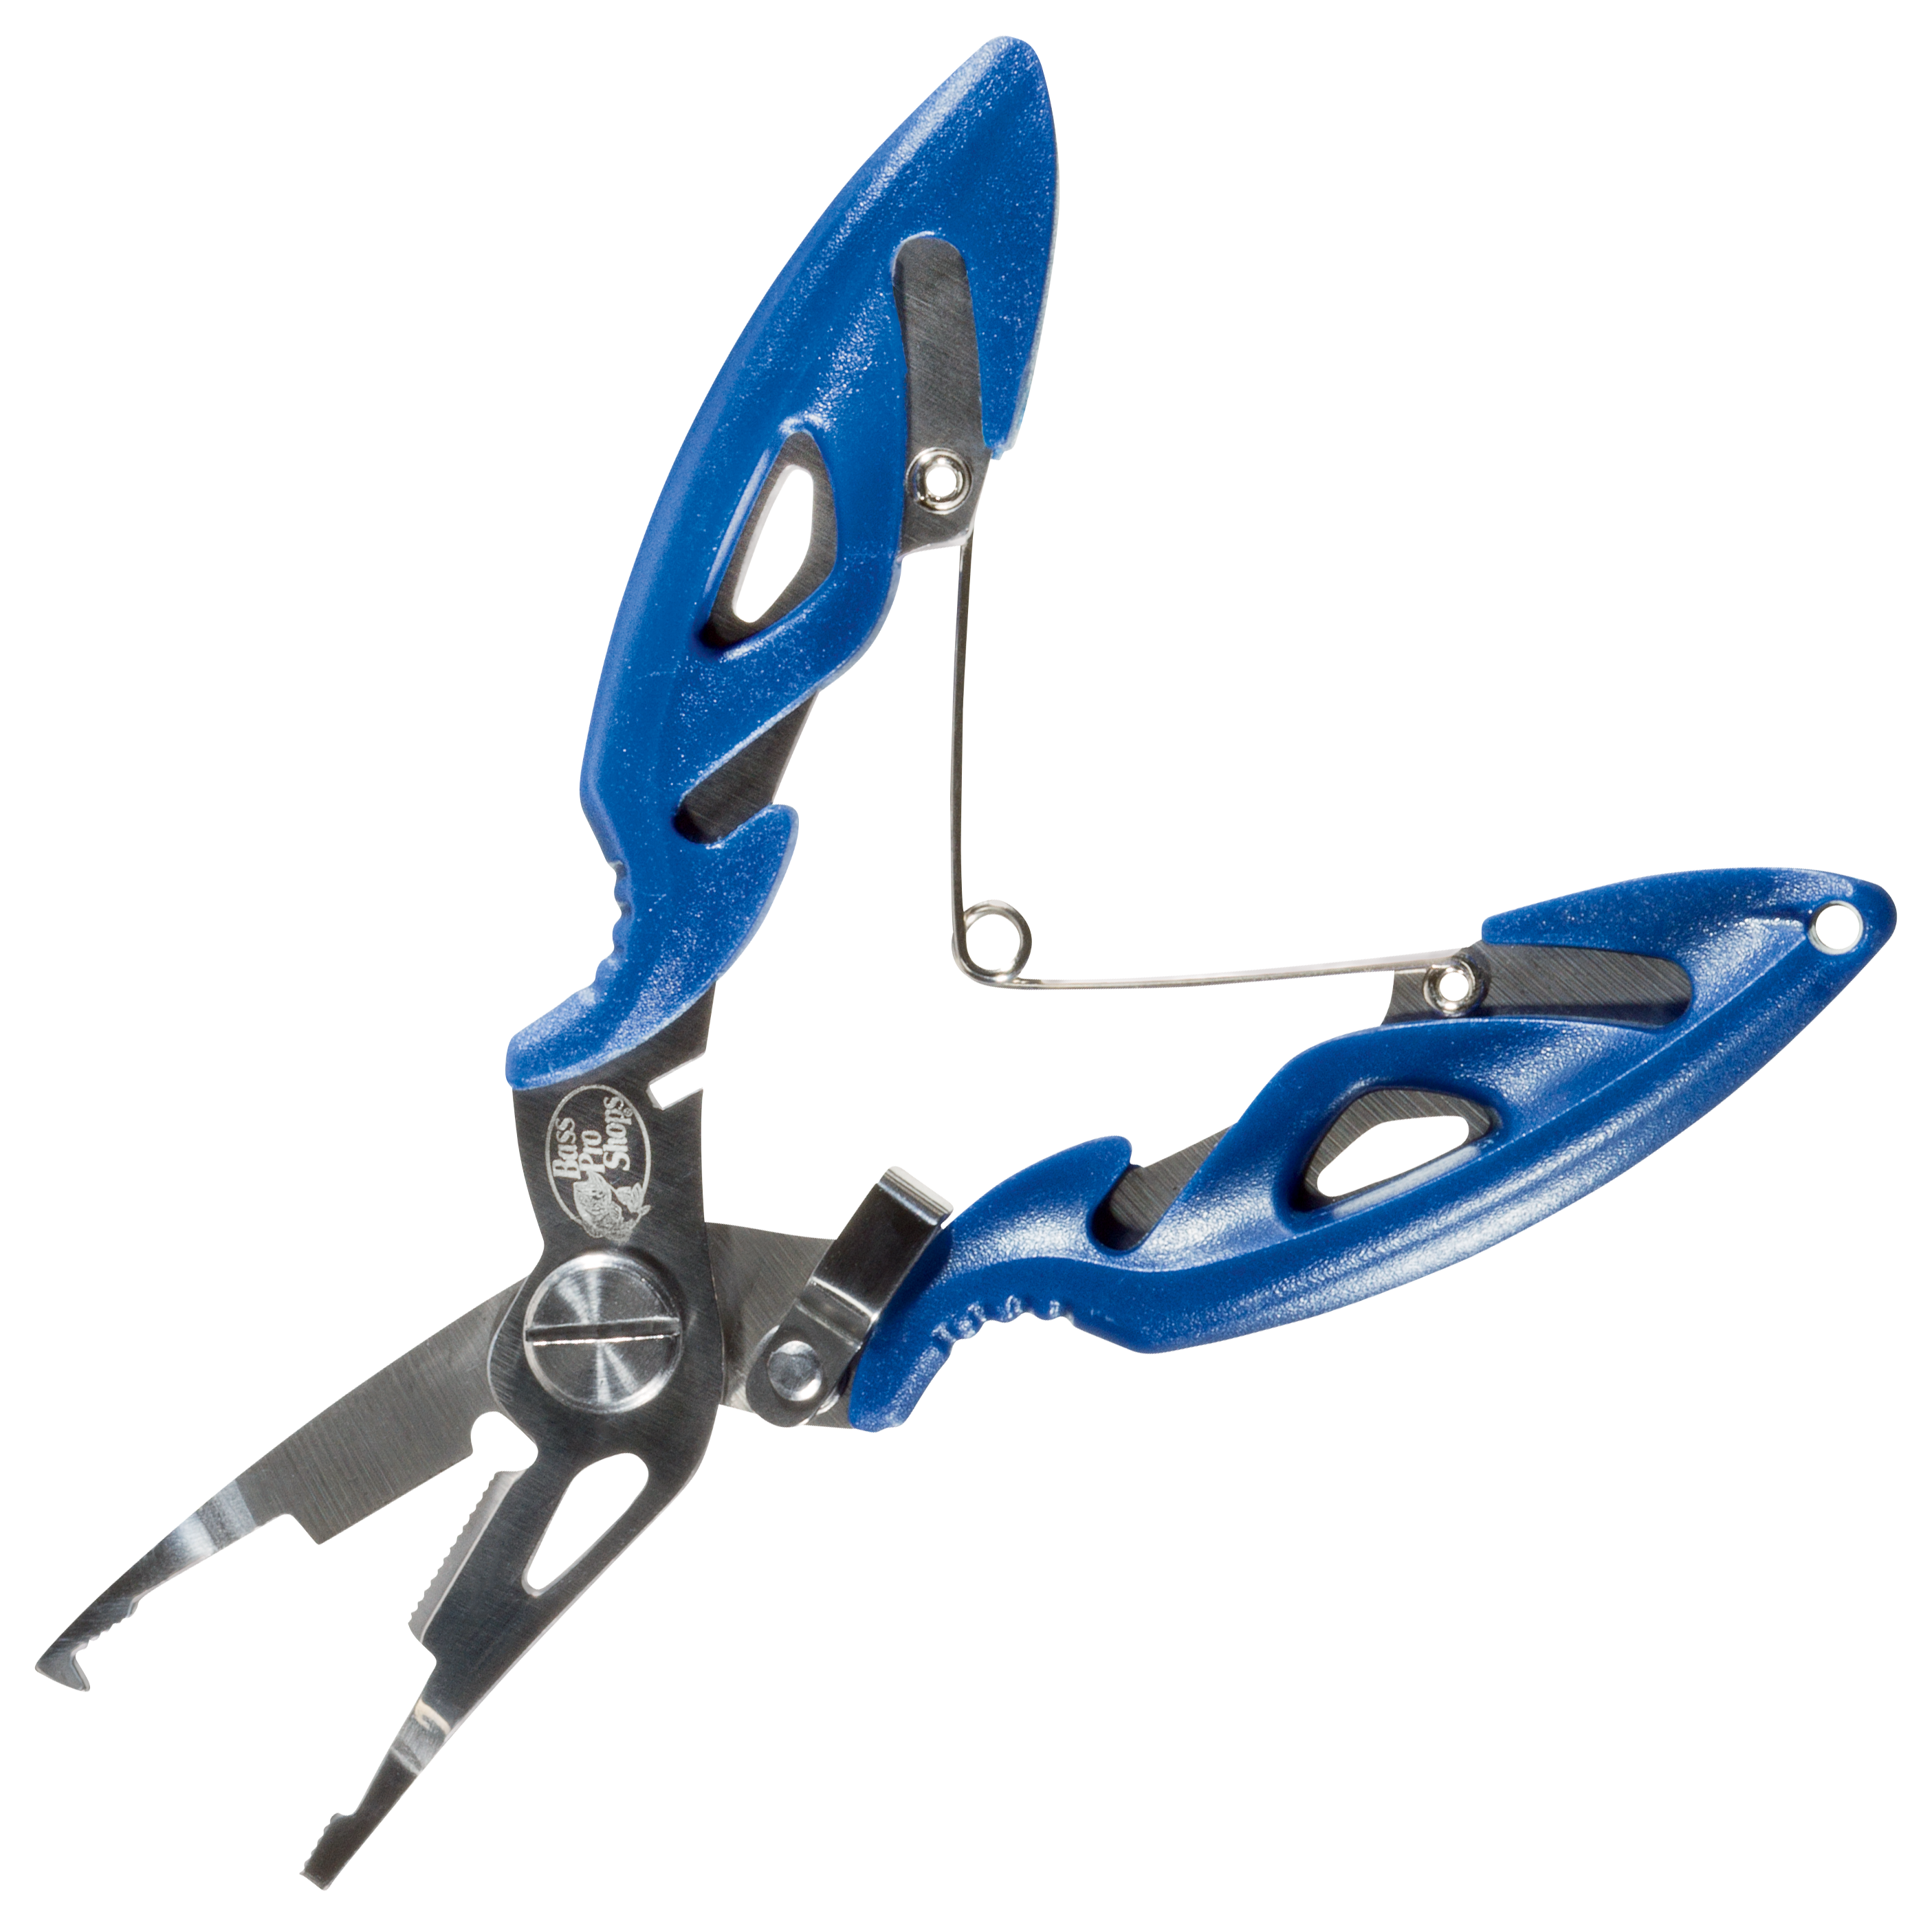 UFISH - Heavy Duty fishing line cutter, fishing clippers for fishing line